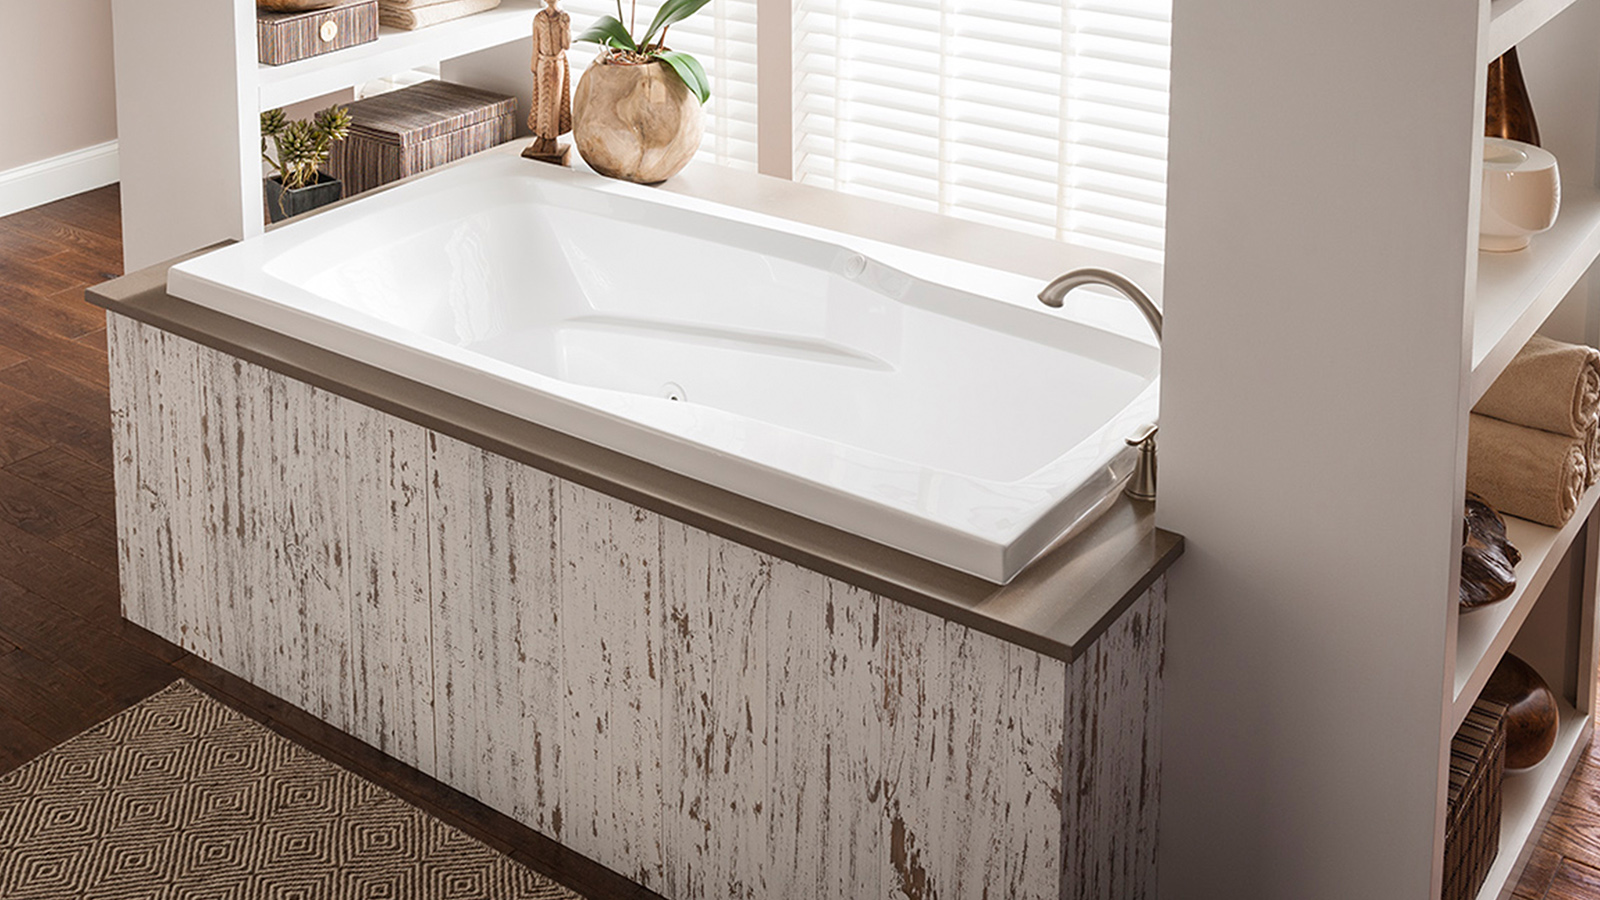 Image of a tub with jetted system and wooden platform.